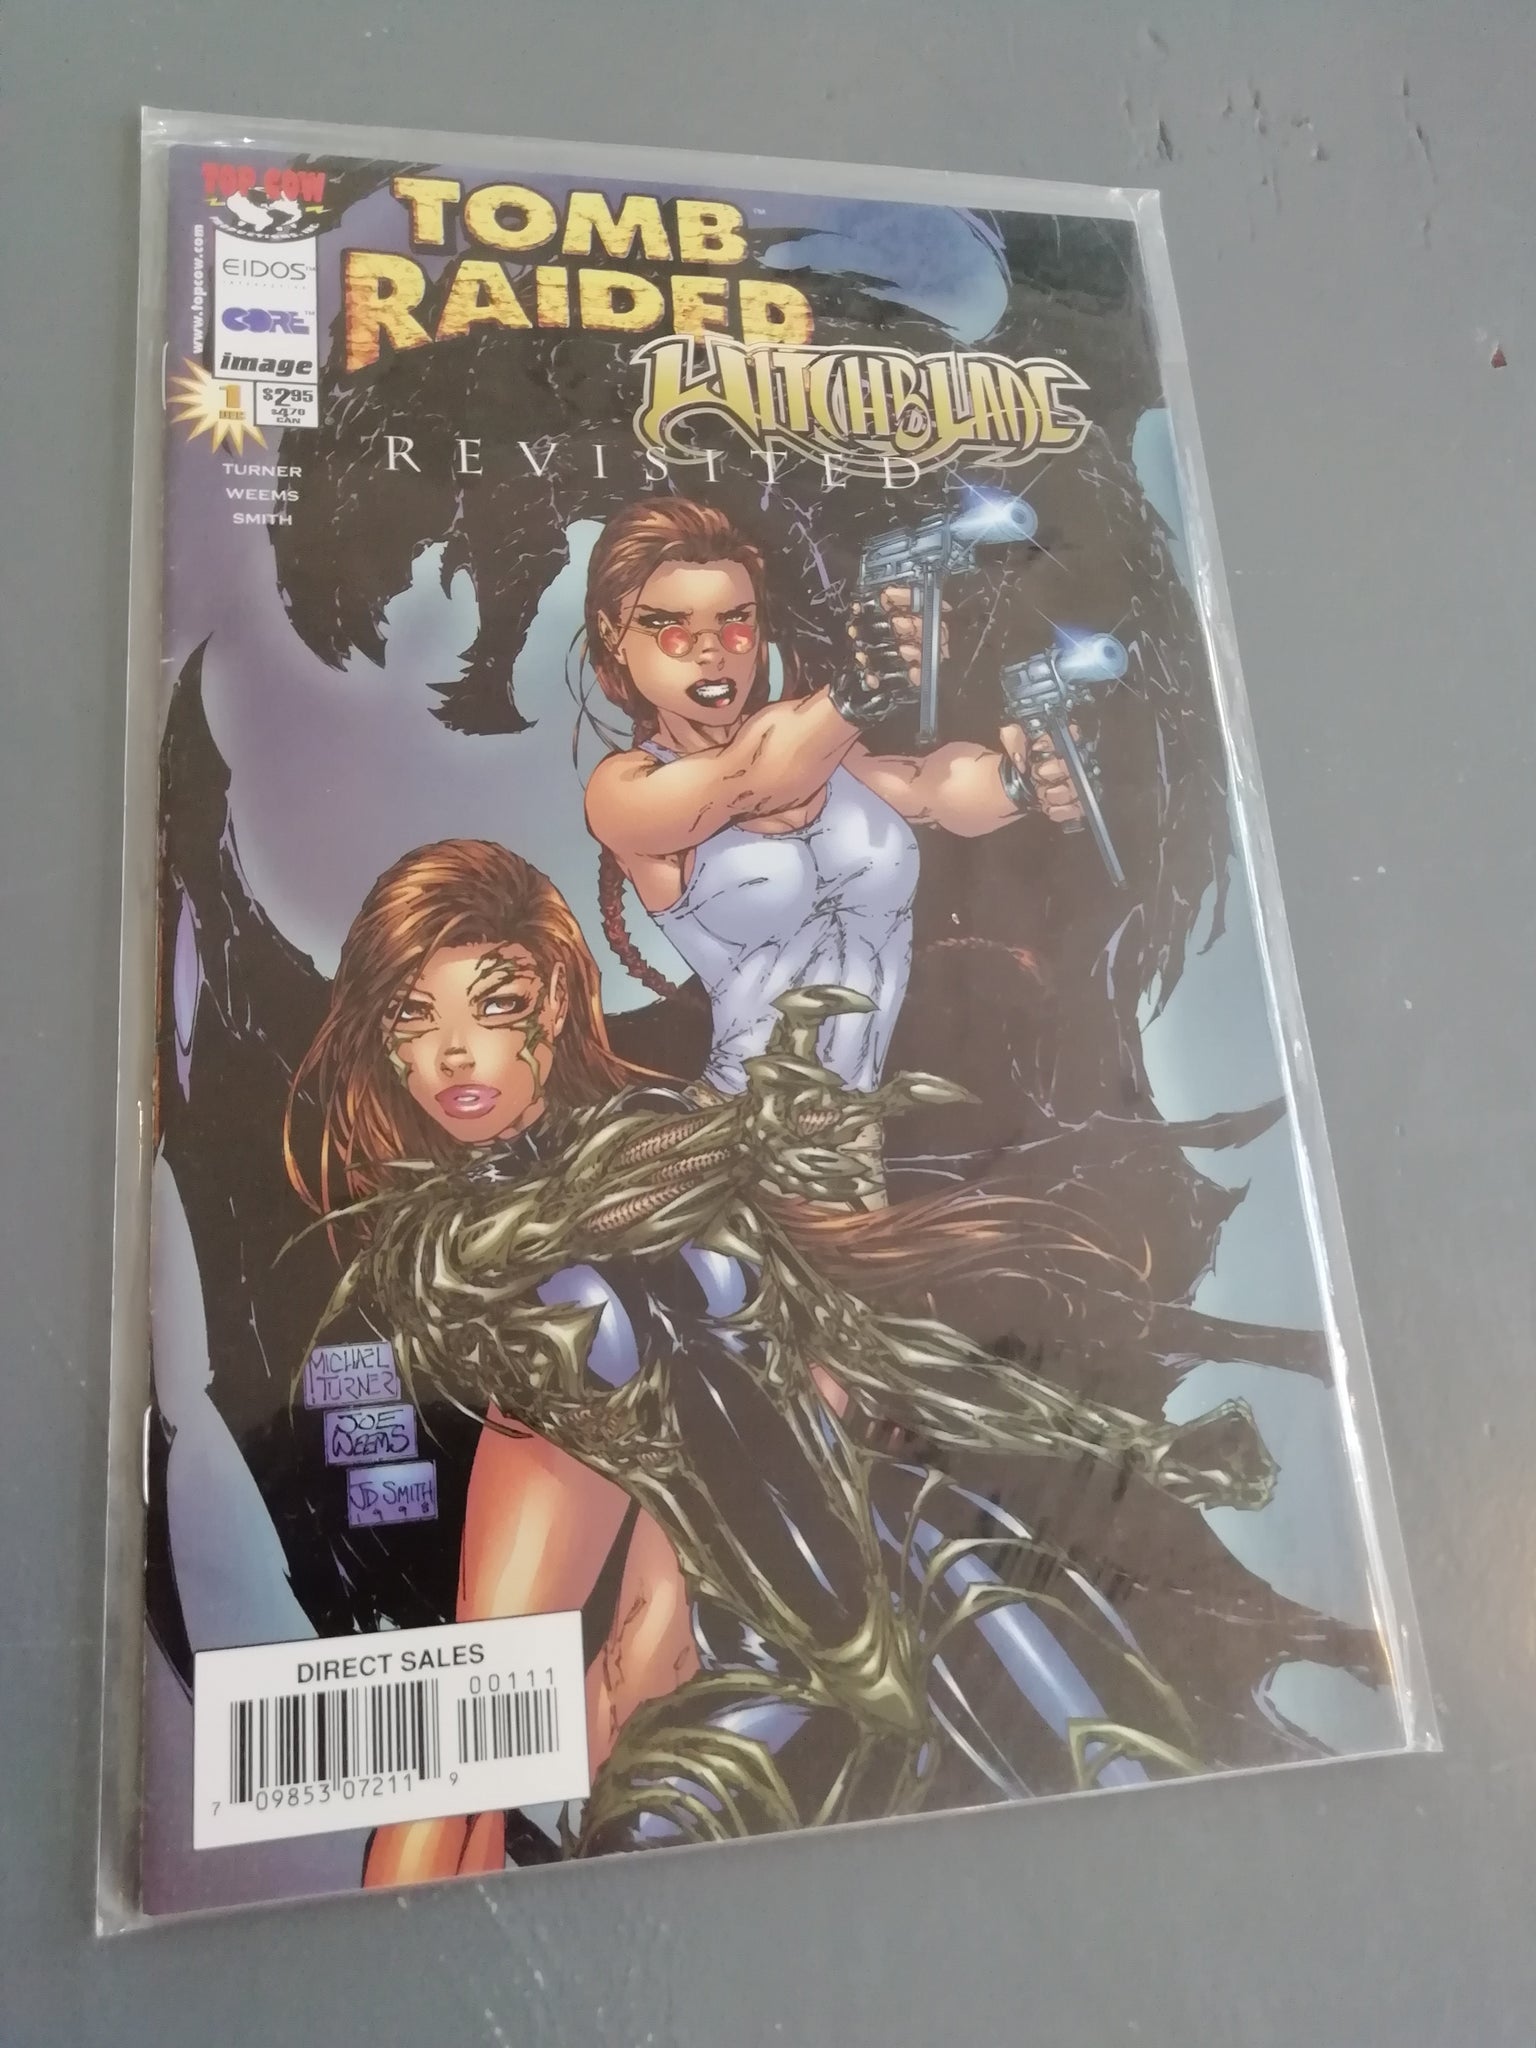 Tomb Raider/Witchblade Revisited #1 VF+